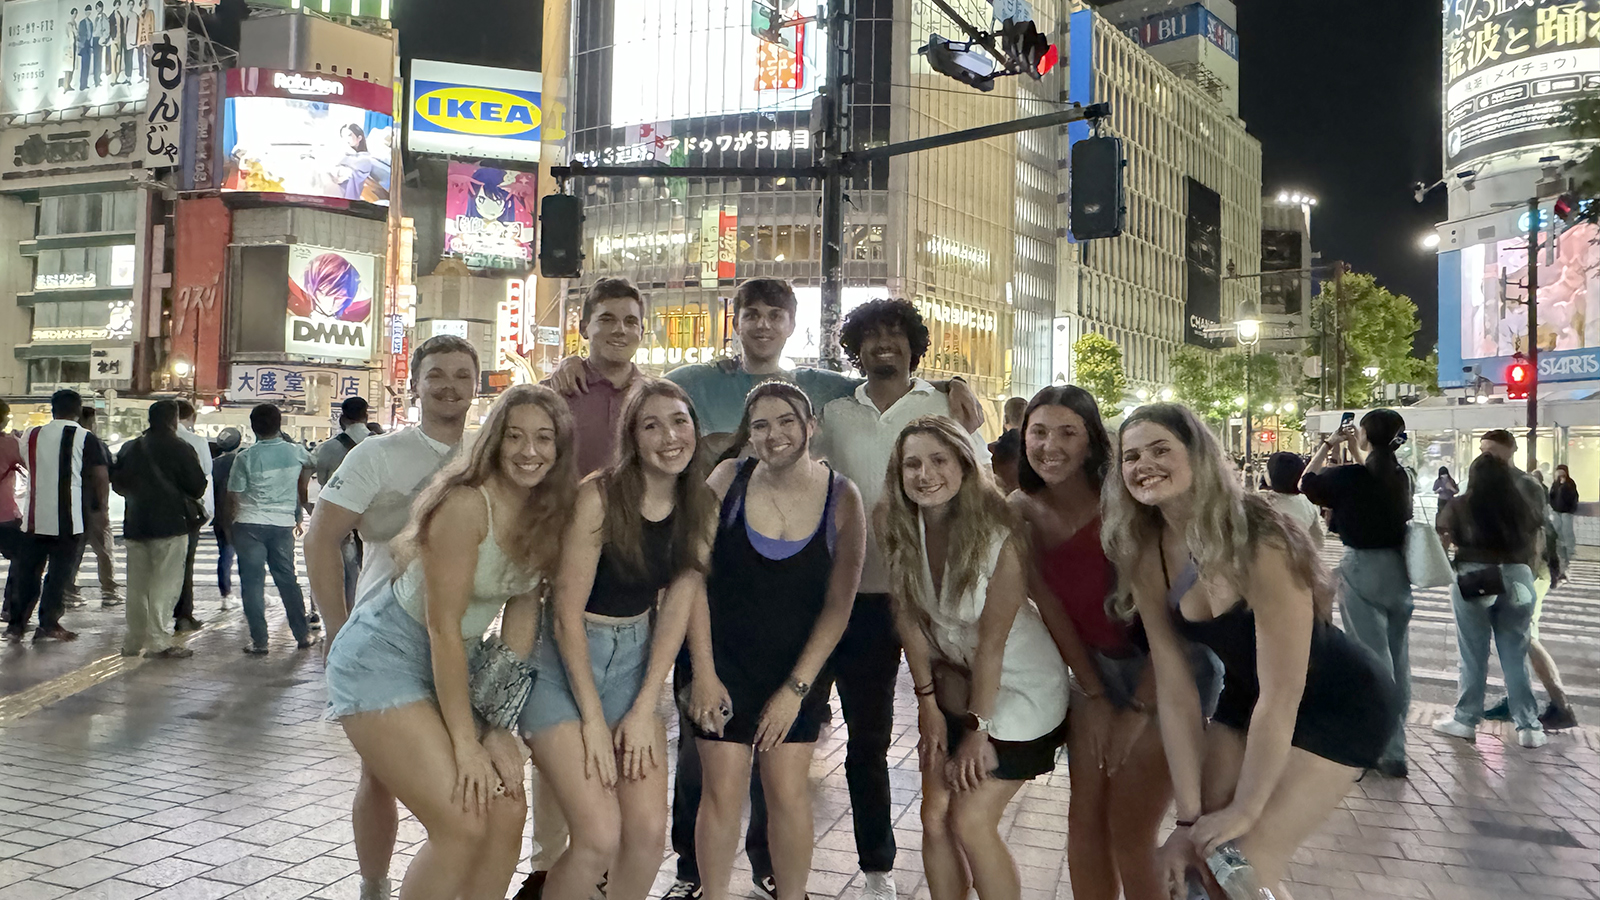 William Pipes and nine other Husker students pose for a group photo on a night in Japan